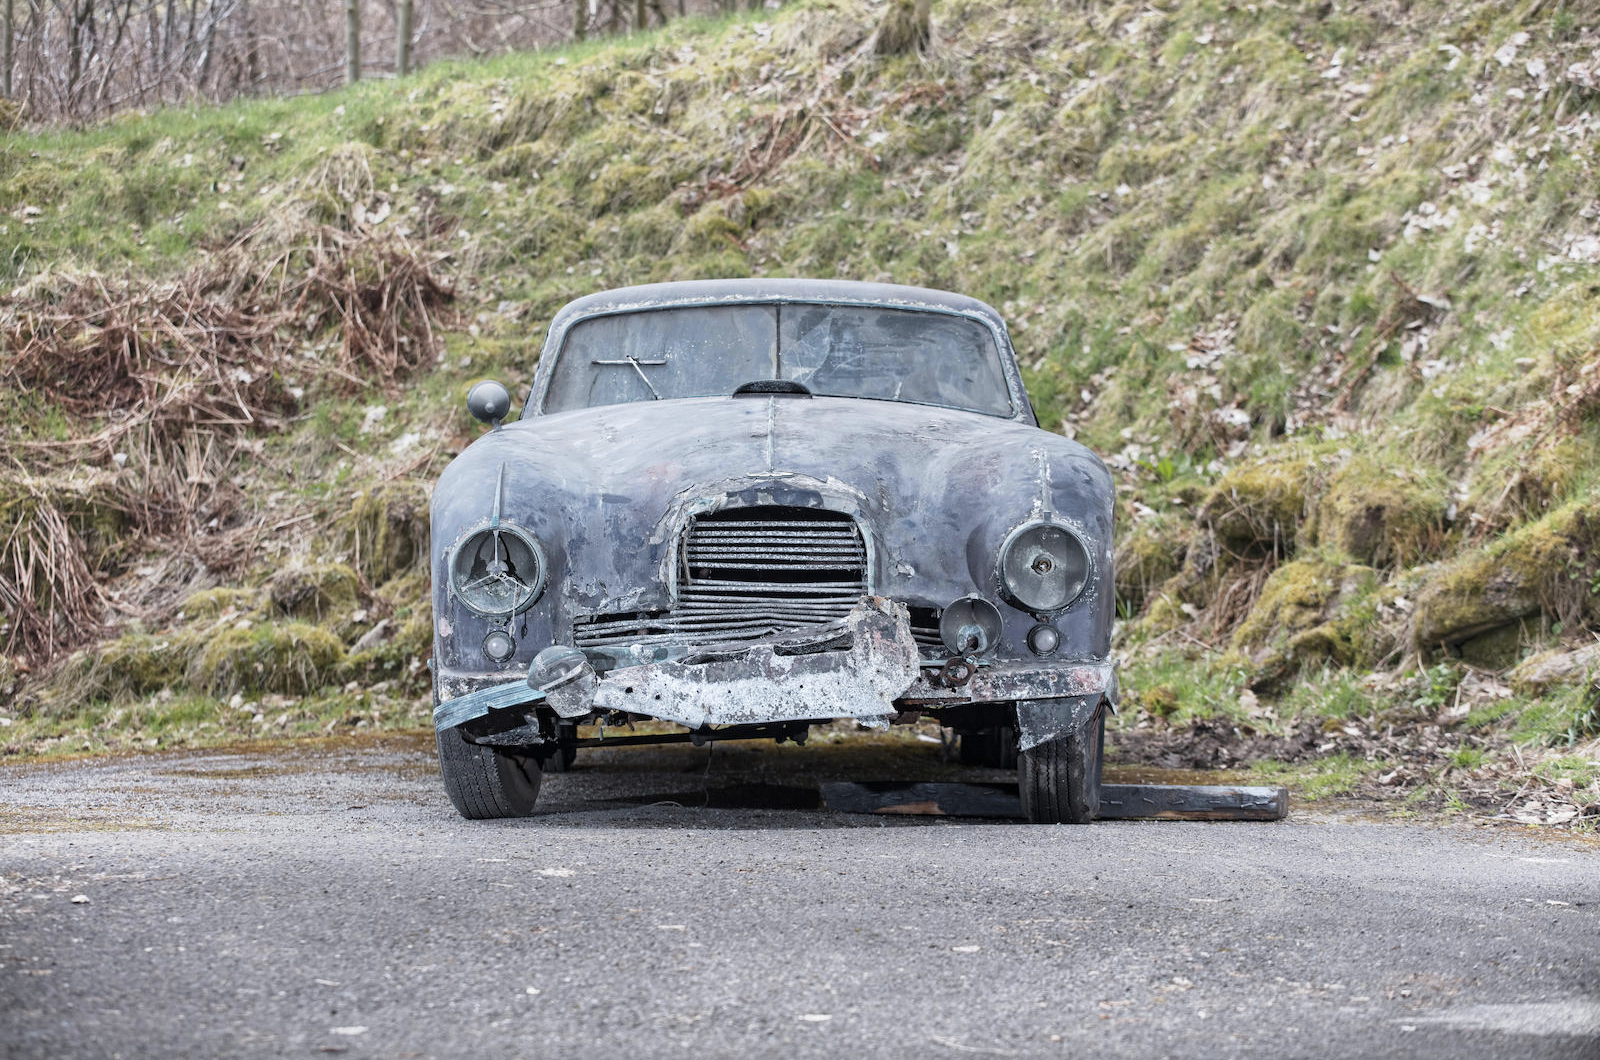 This ruined Aston Martin could be yours for £50K